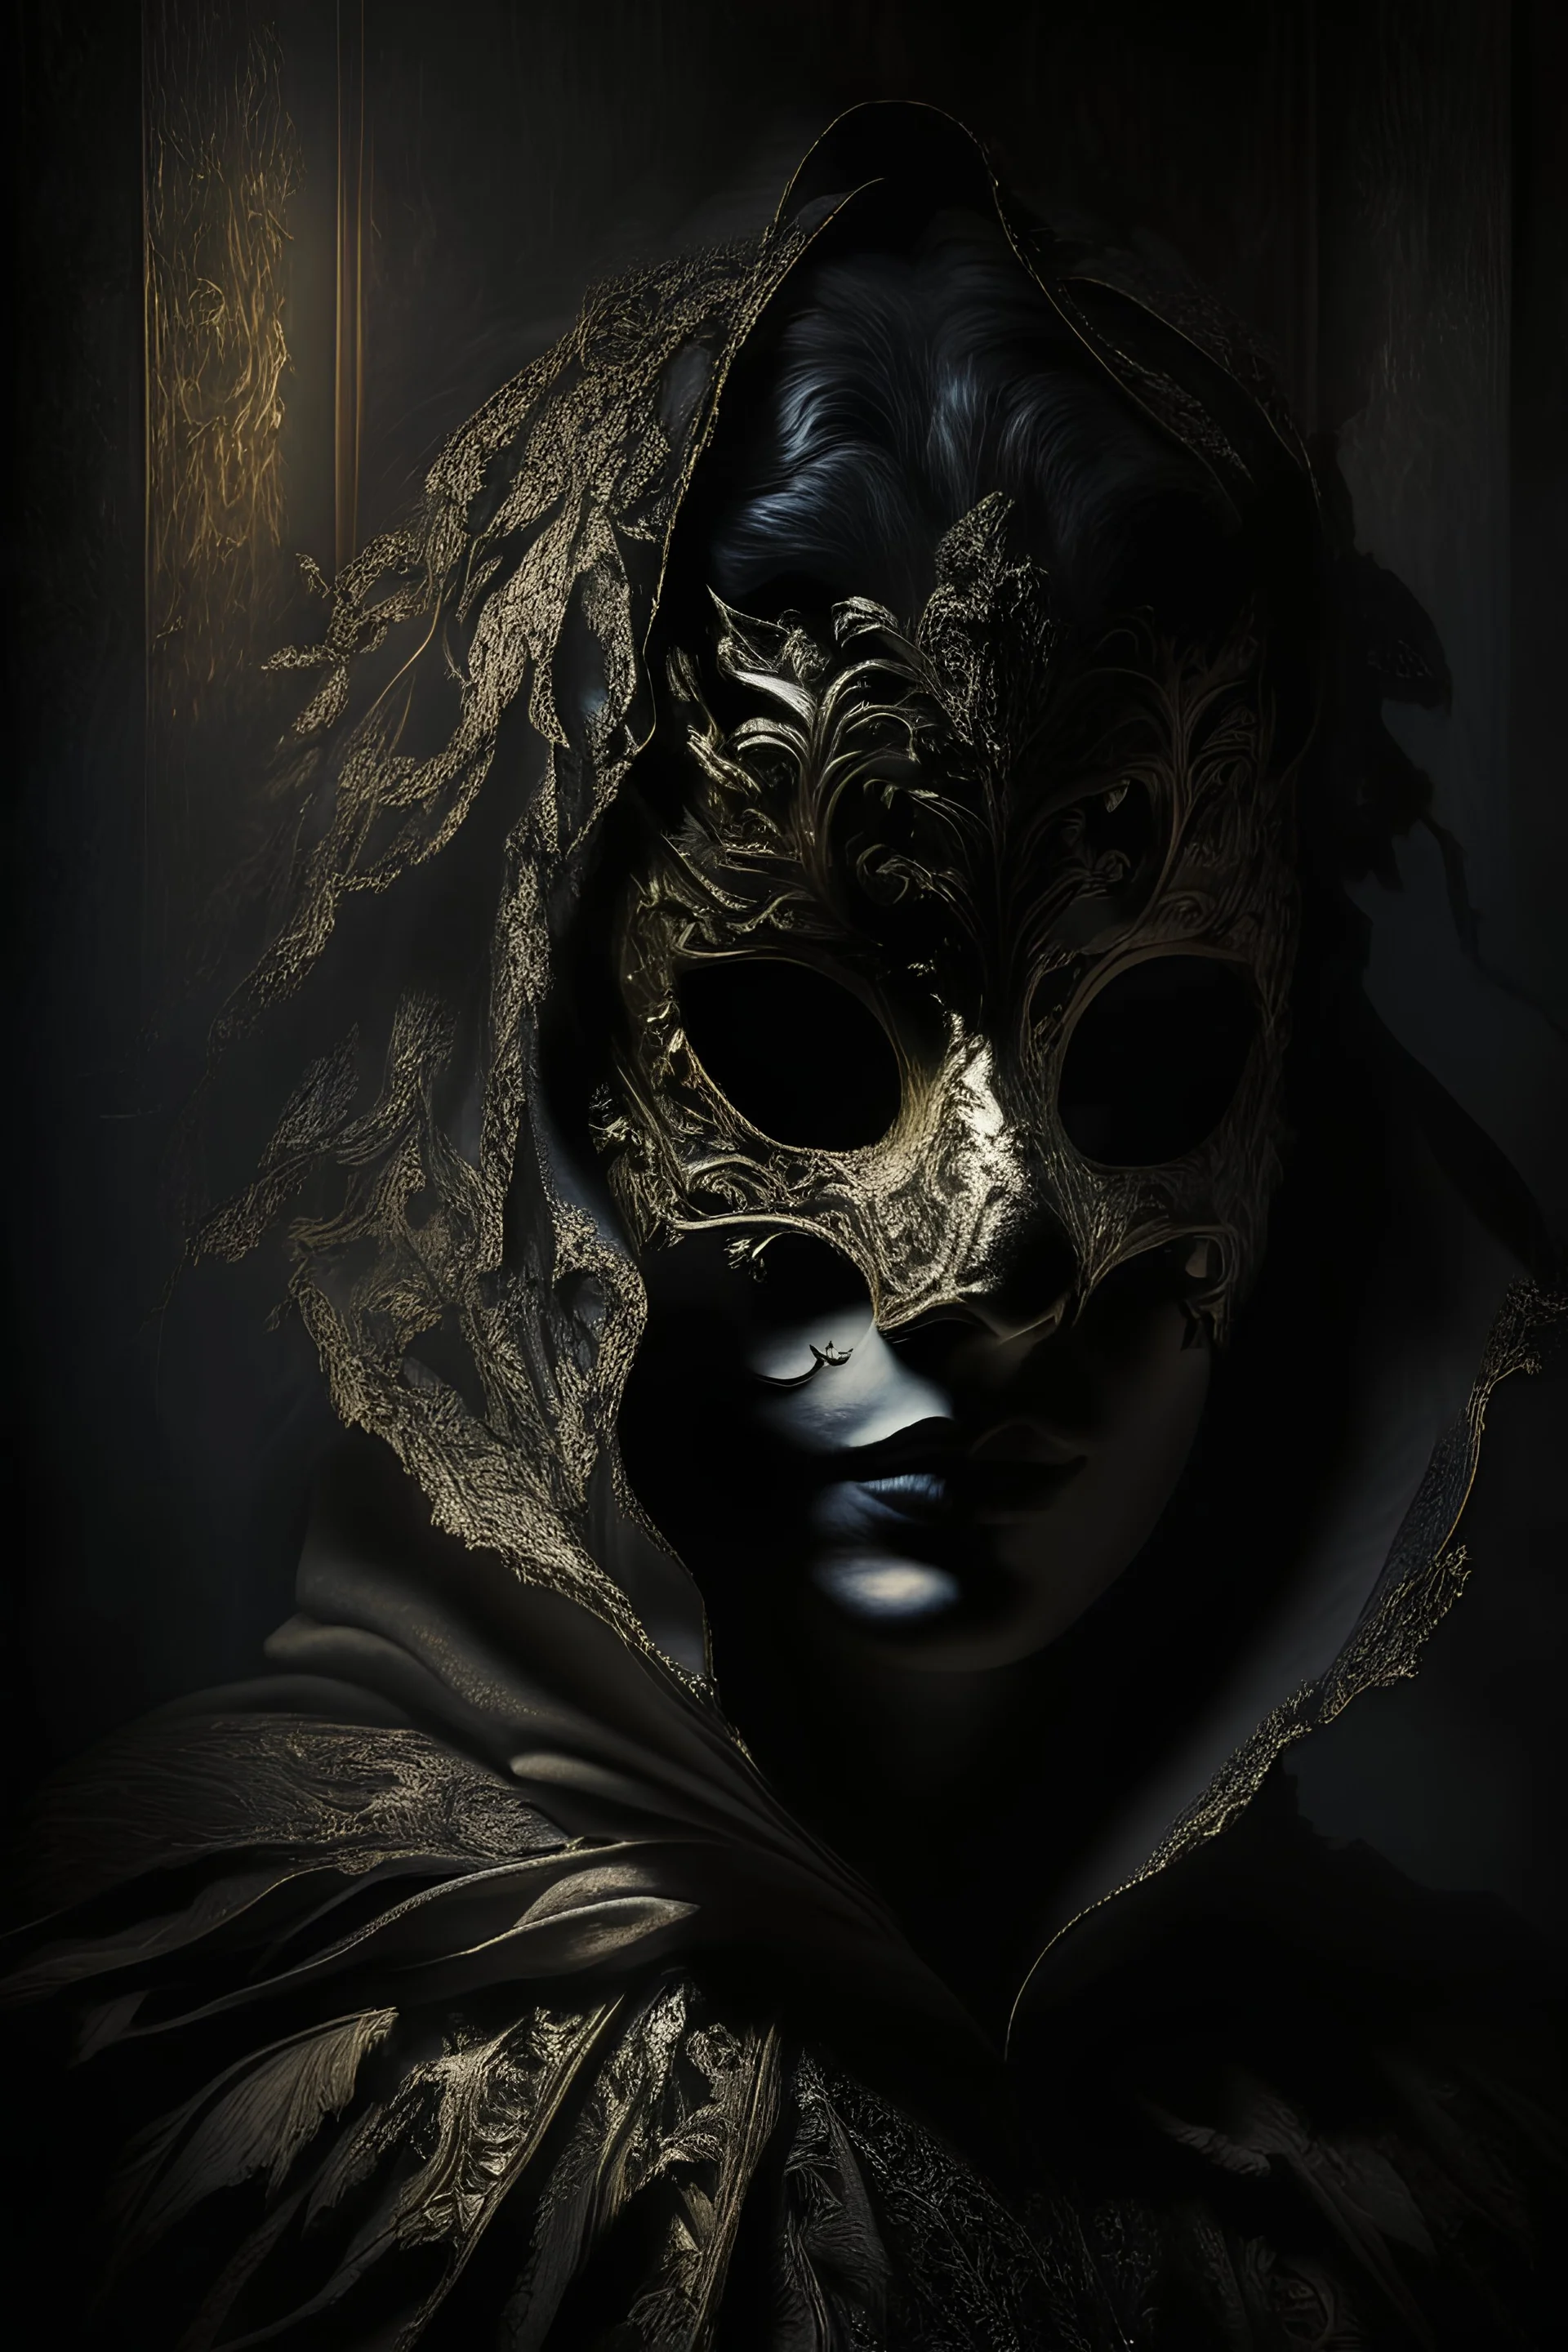 An intriguing, chiaroscuro-style portrait of a mysterious figure wearing a Venetian mask, shrouded in shadows and a dramatic play of light and dark, capturing the enigmatic aura and the intricate details of the ornate mask.